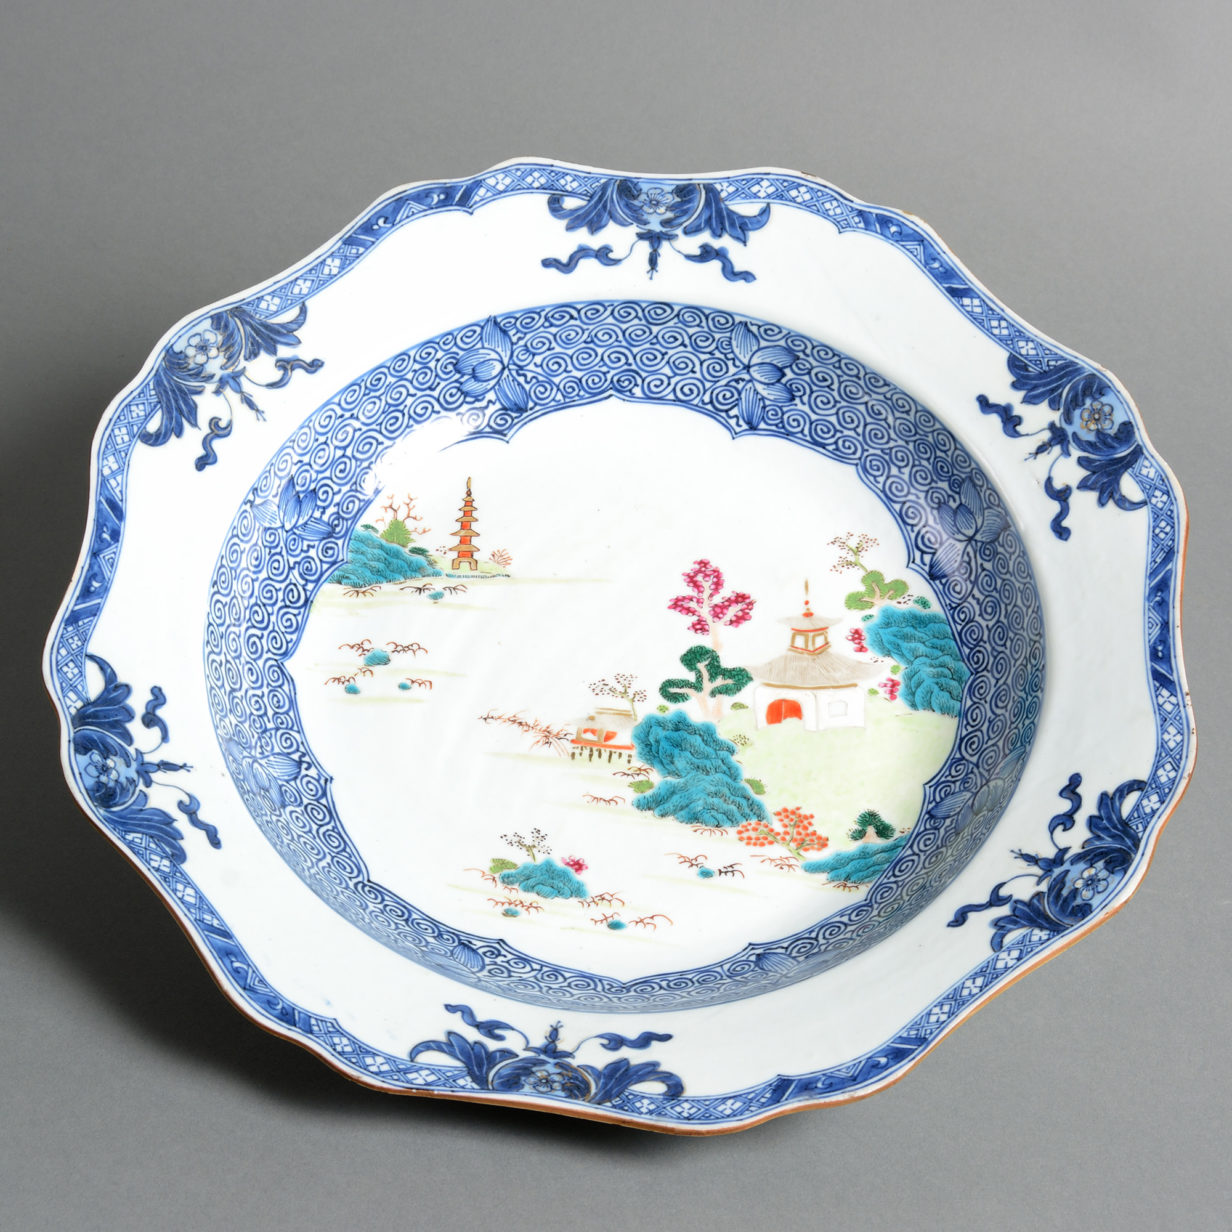 A late 18th century famille rose porcelain bowl